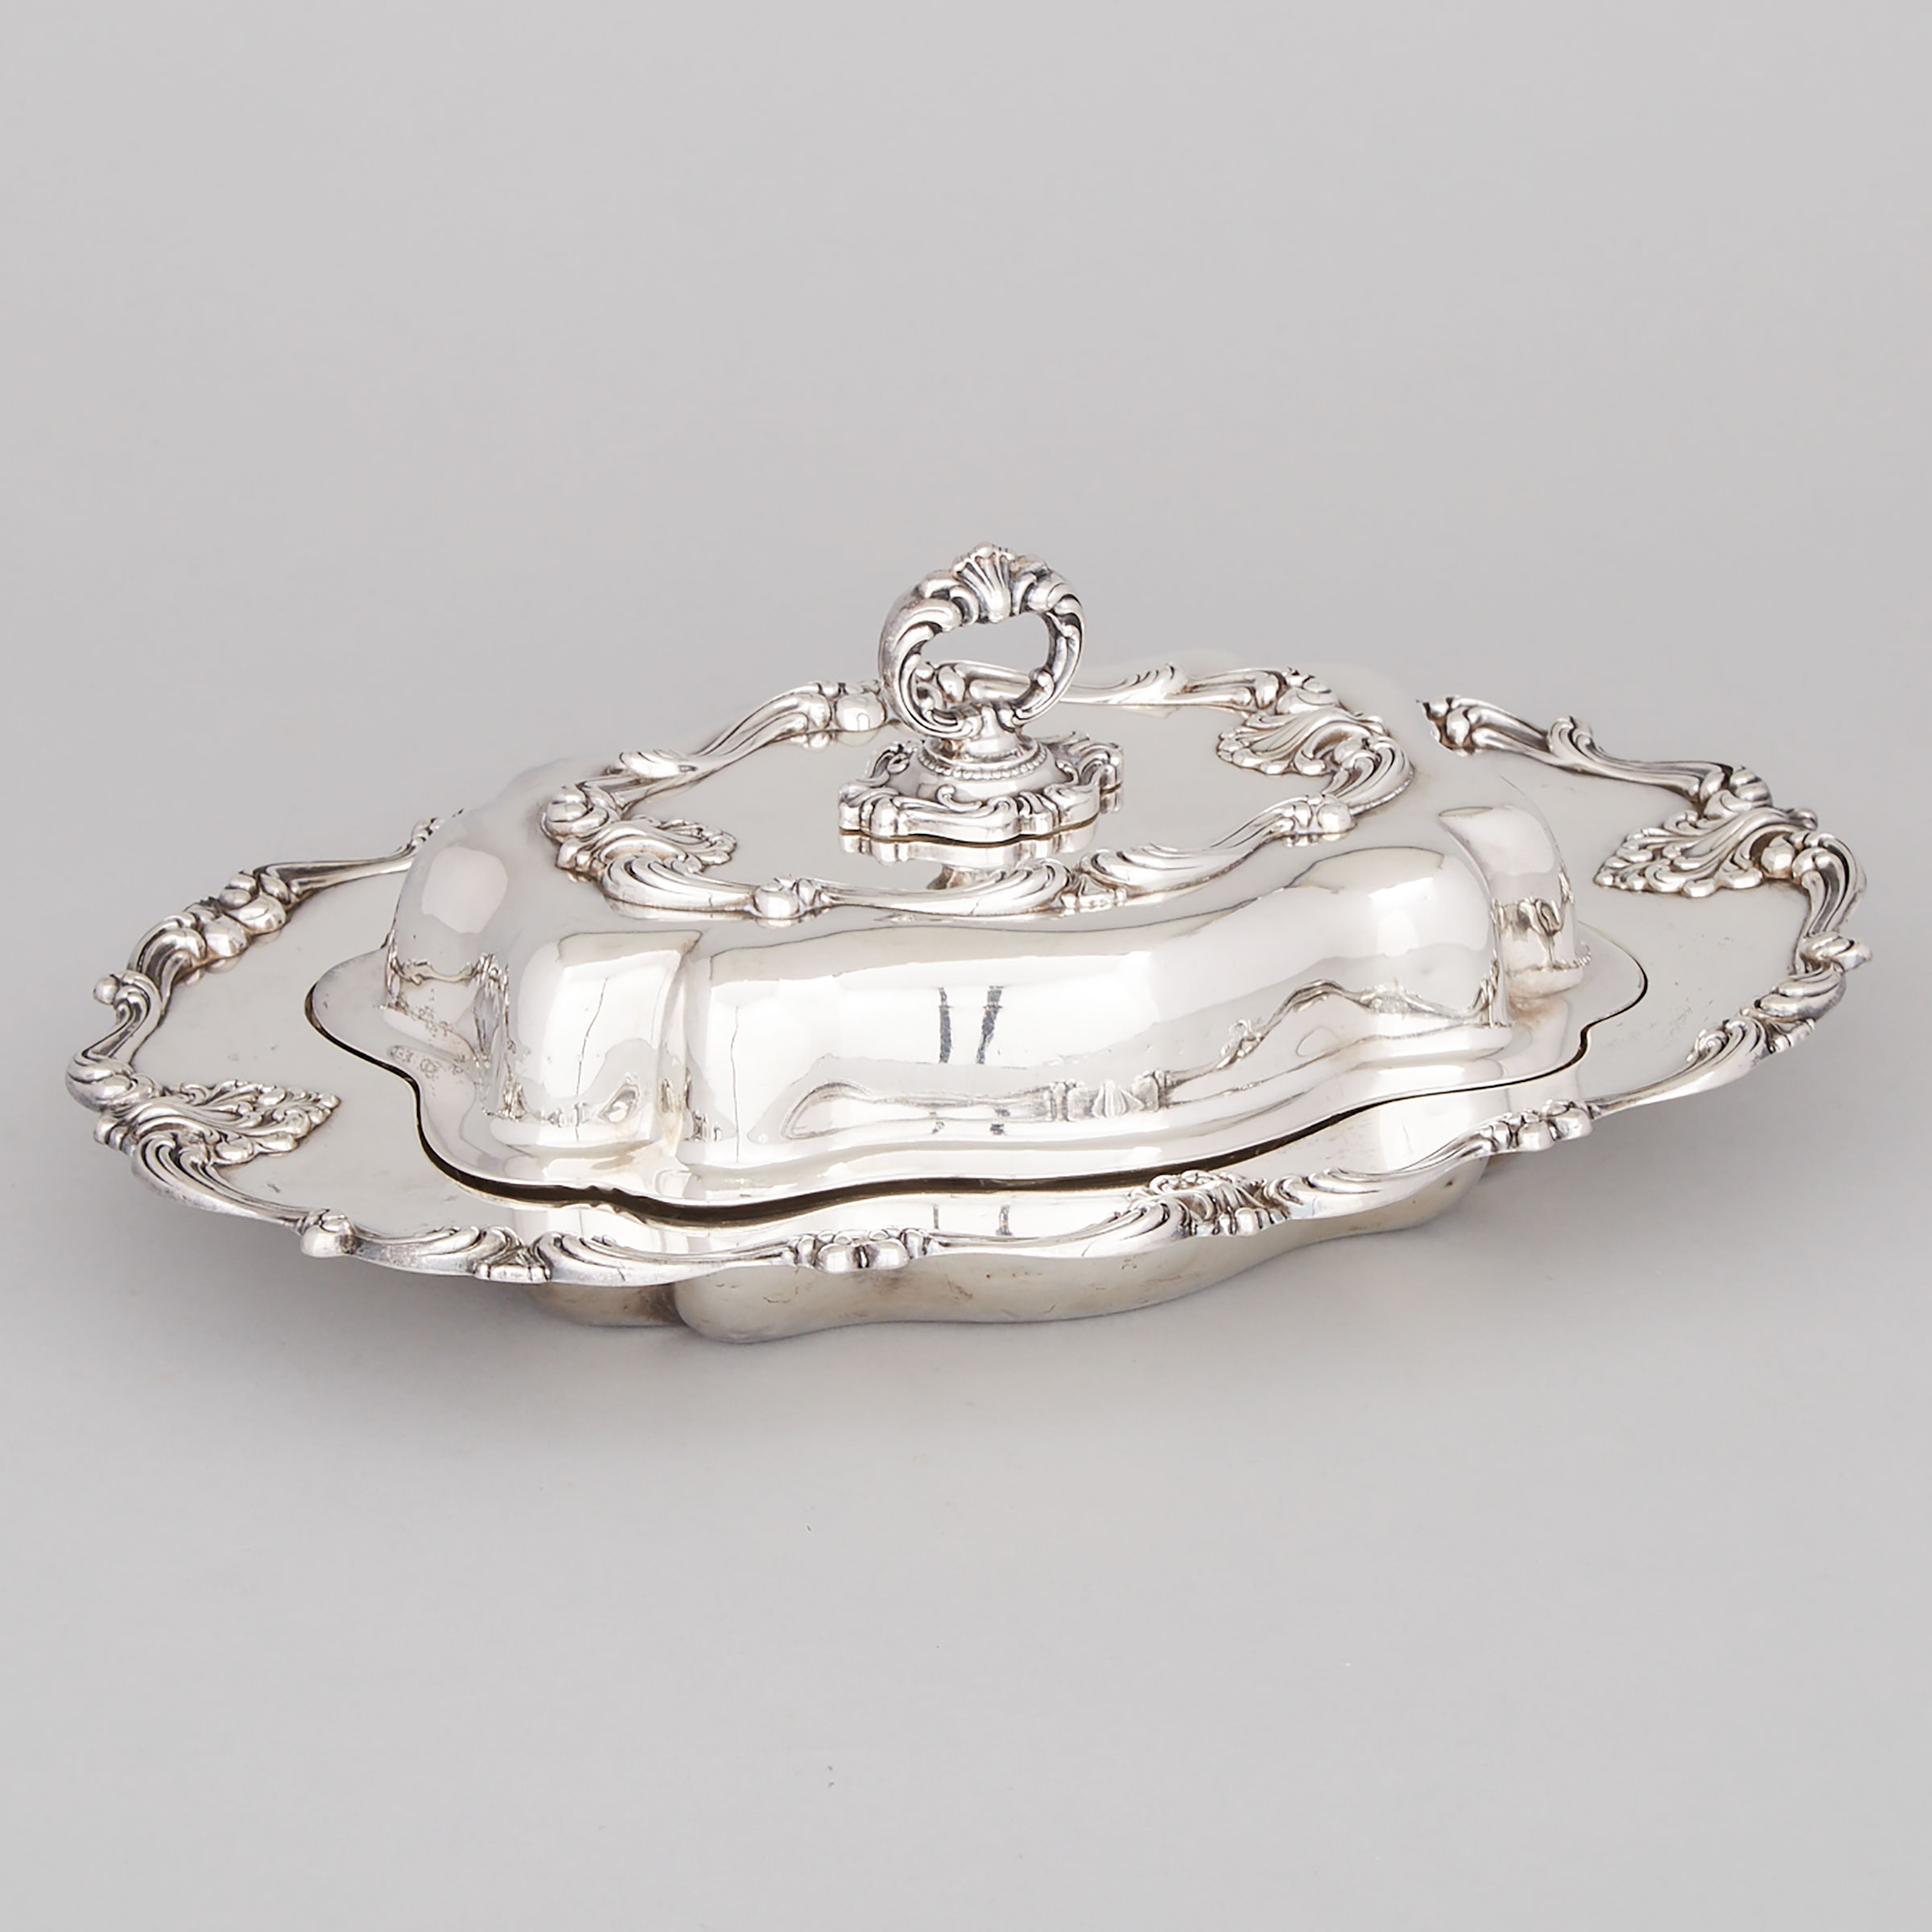 American Silver Covered Entrée Dish, Frank Whiting Co., North Attleboro, Mass., 20th century